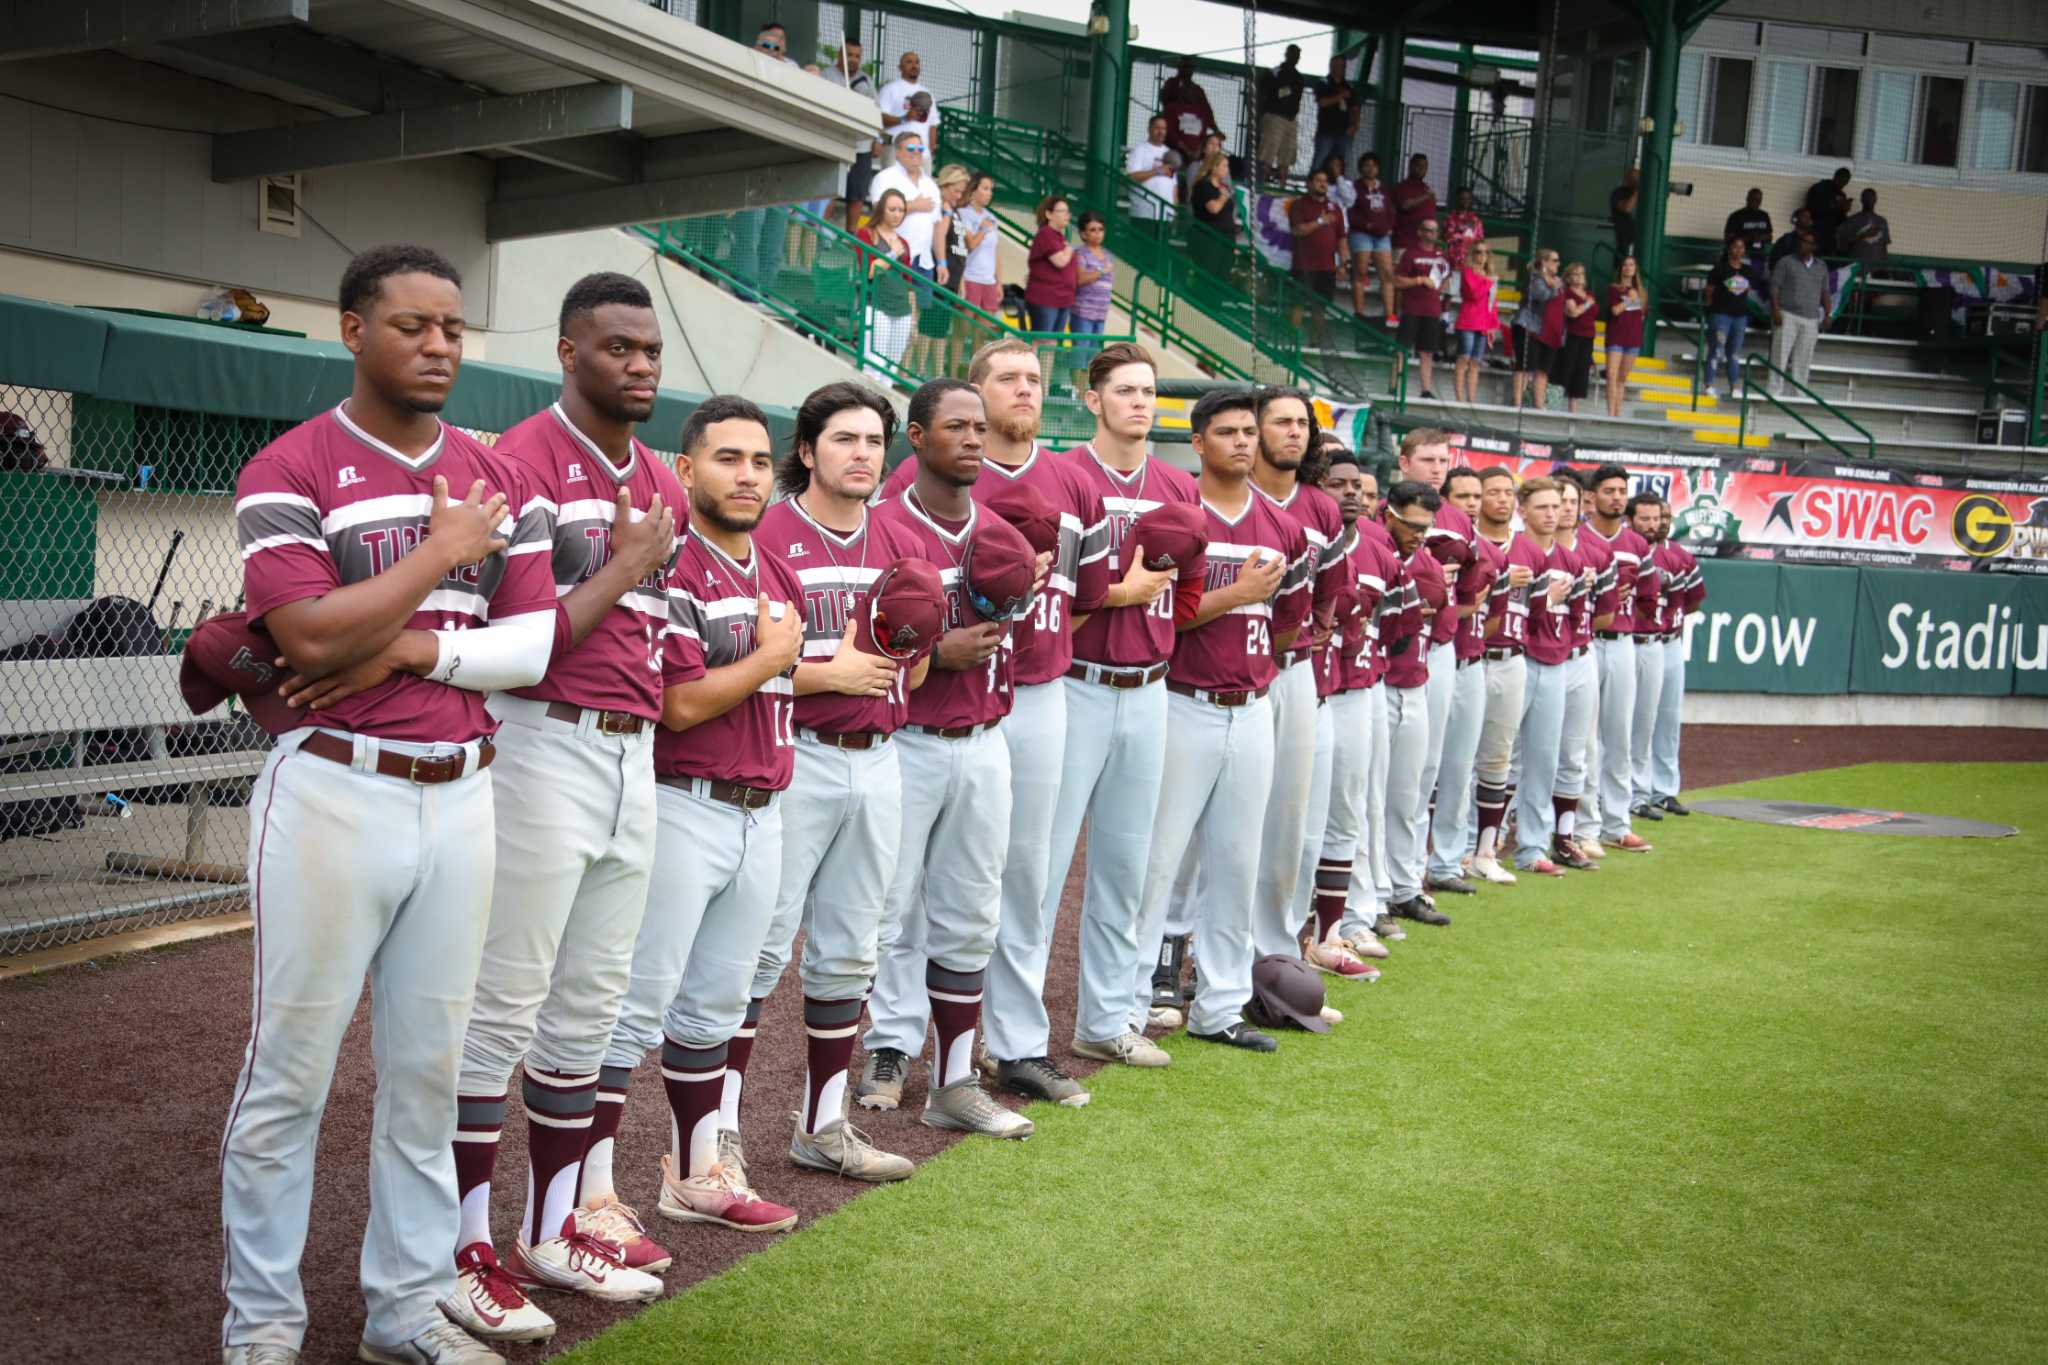 Black players making their mark on college baseball teams this